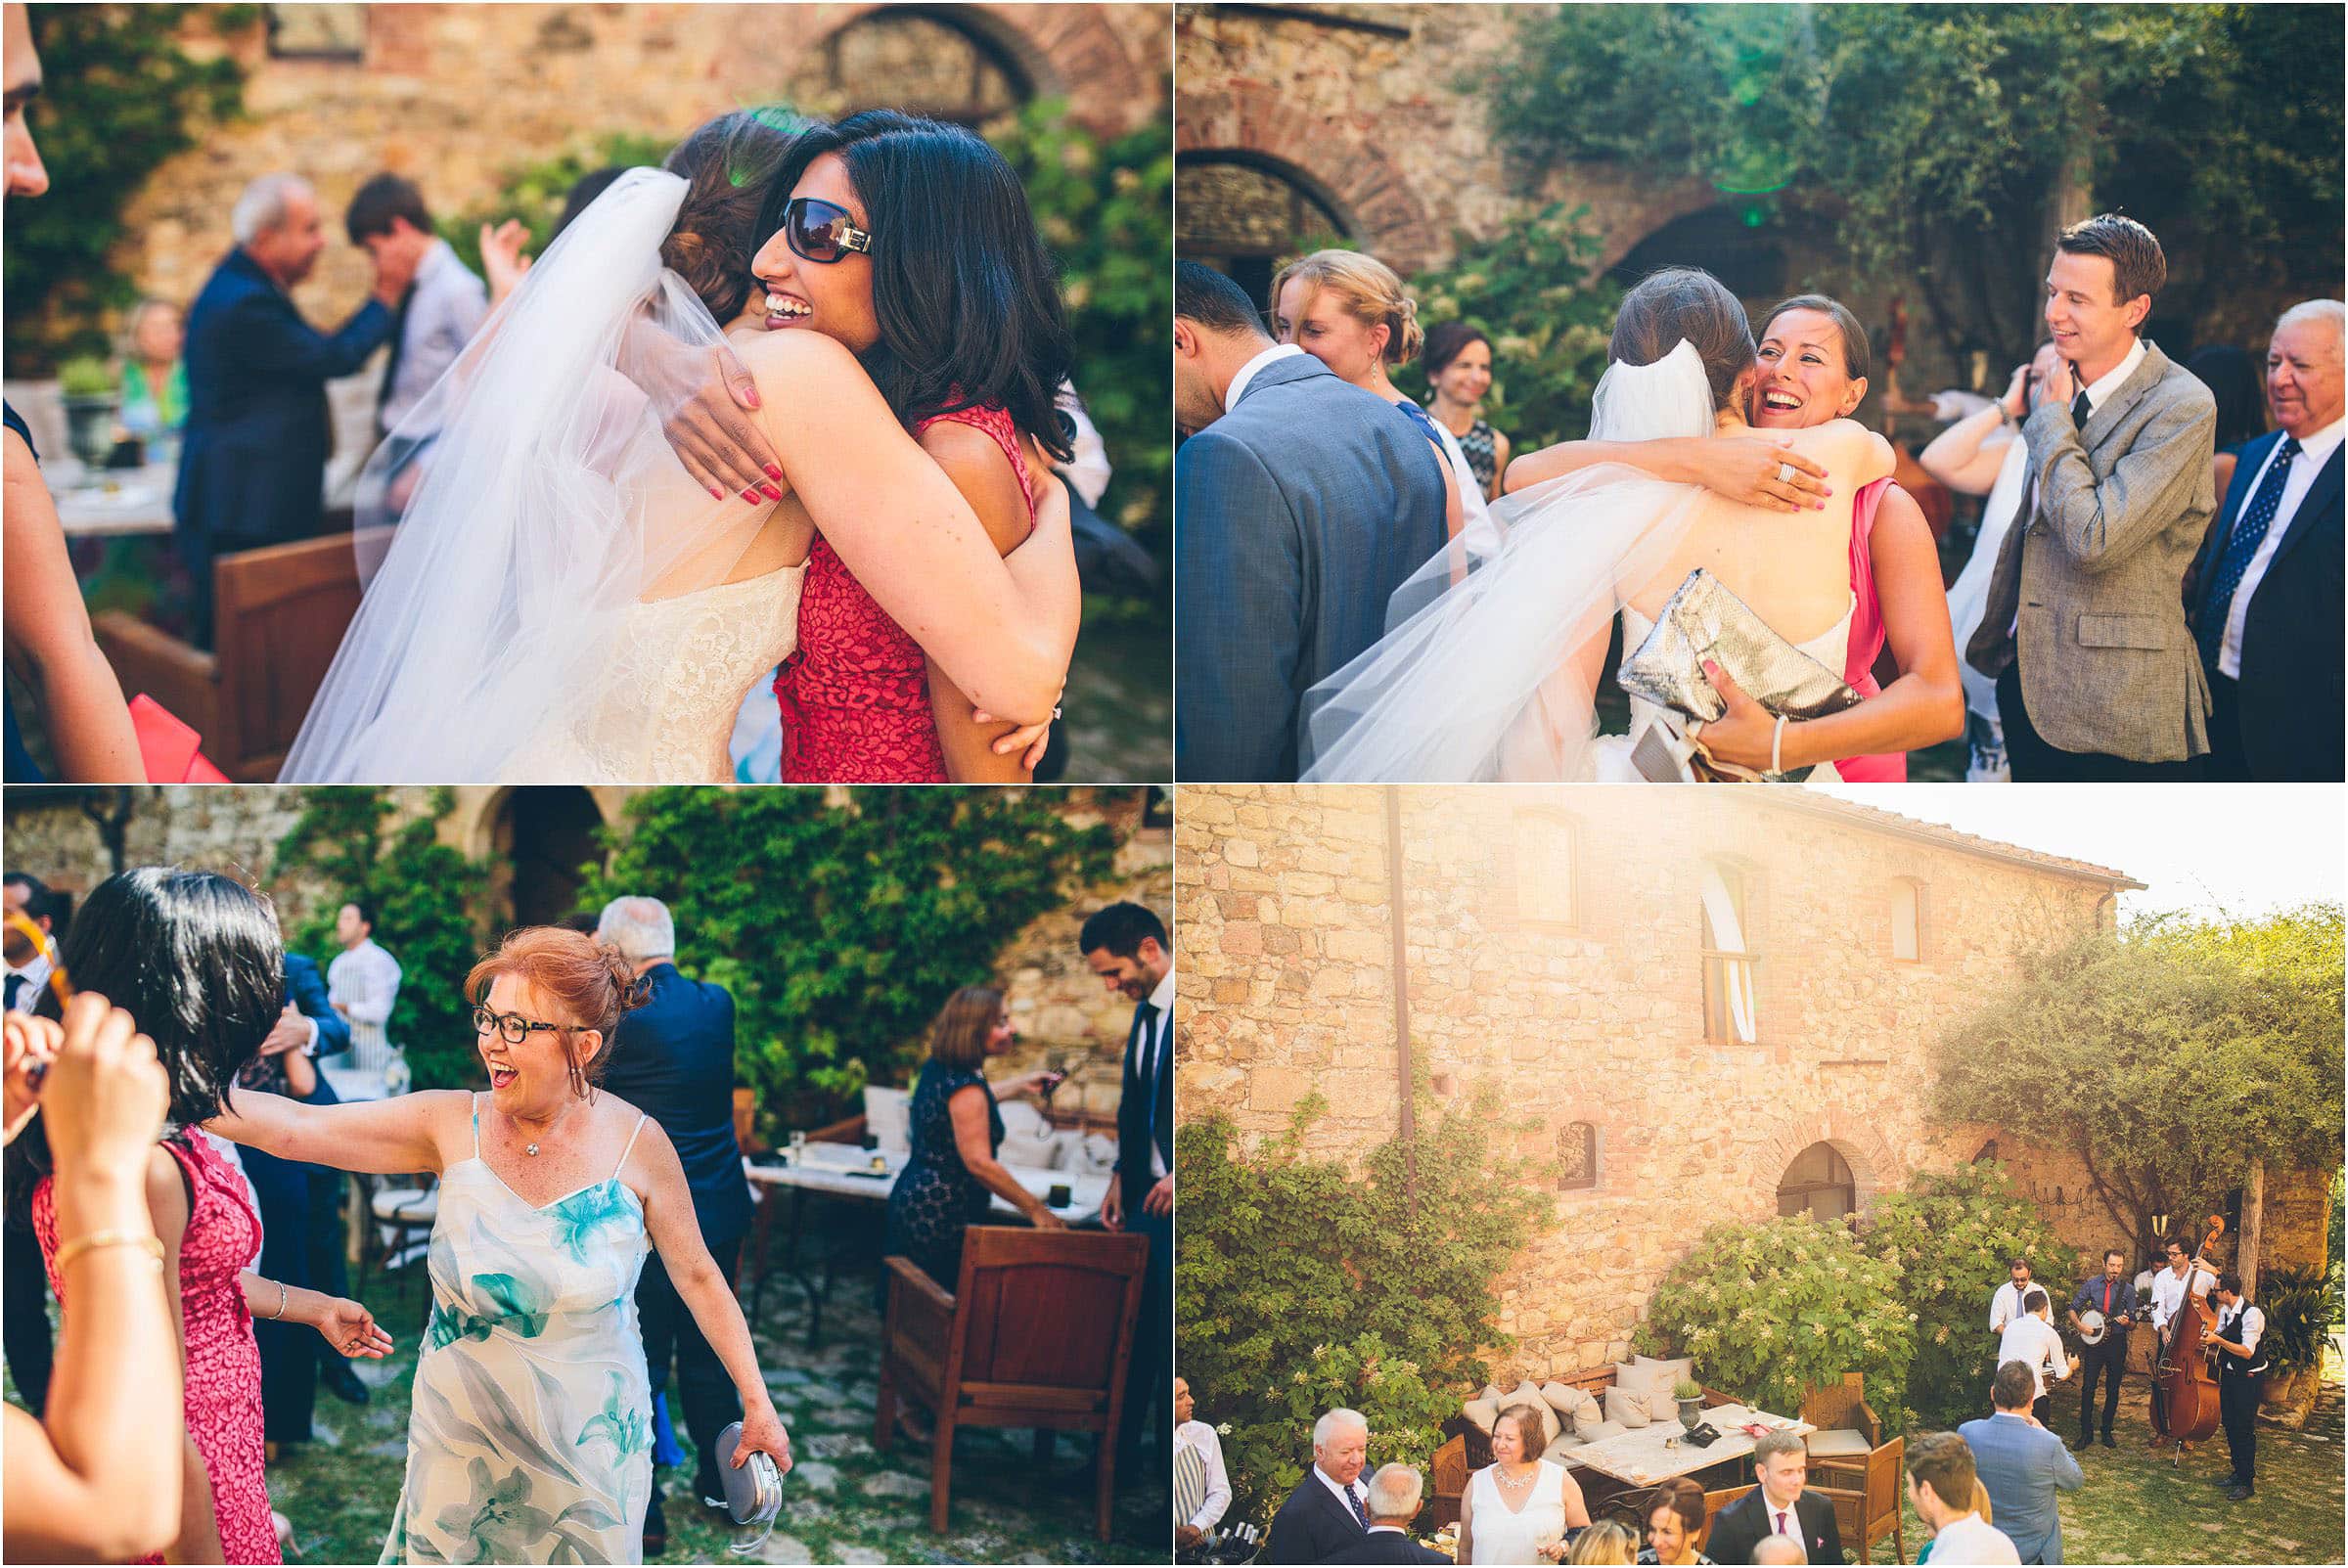 Wedding guests relaxing in the garden at Castello di Vicarello in Tuscany